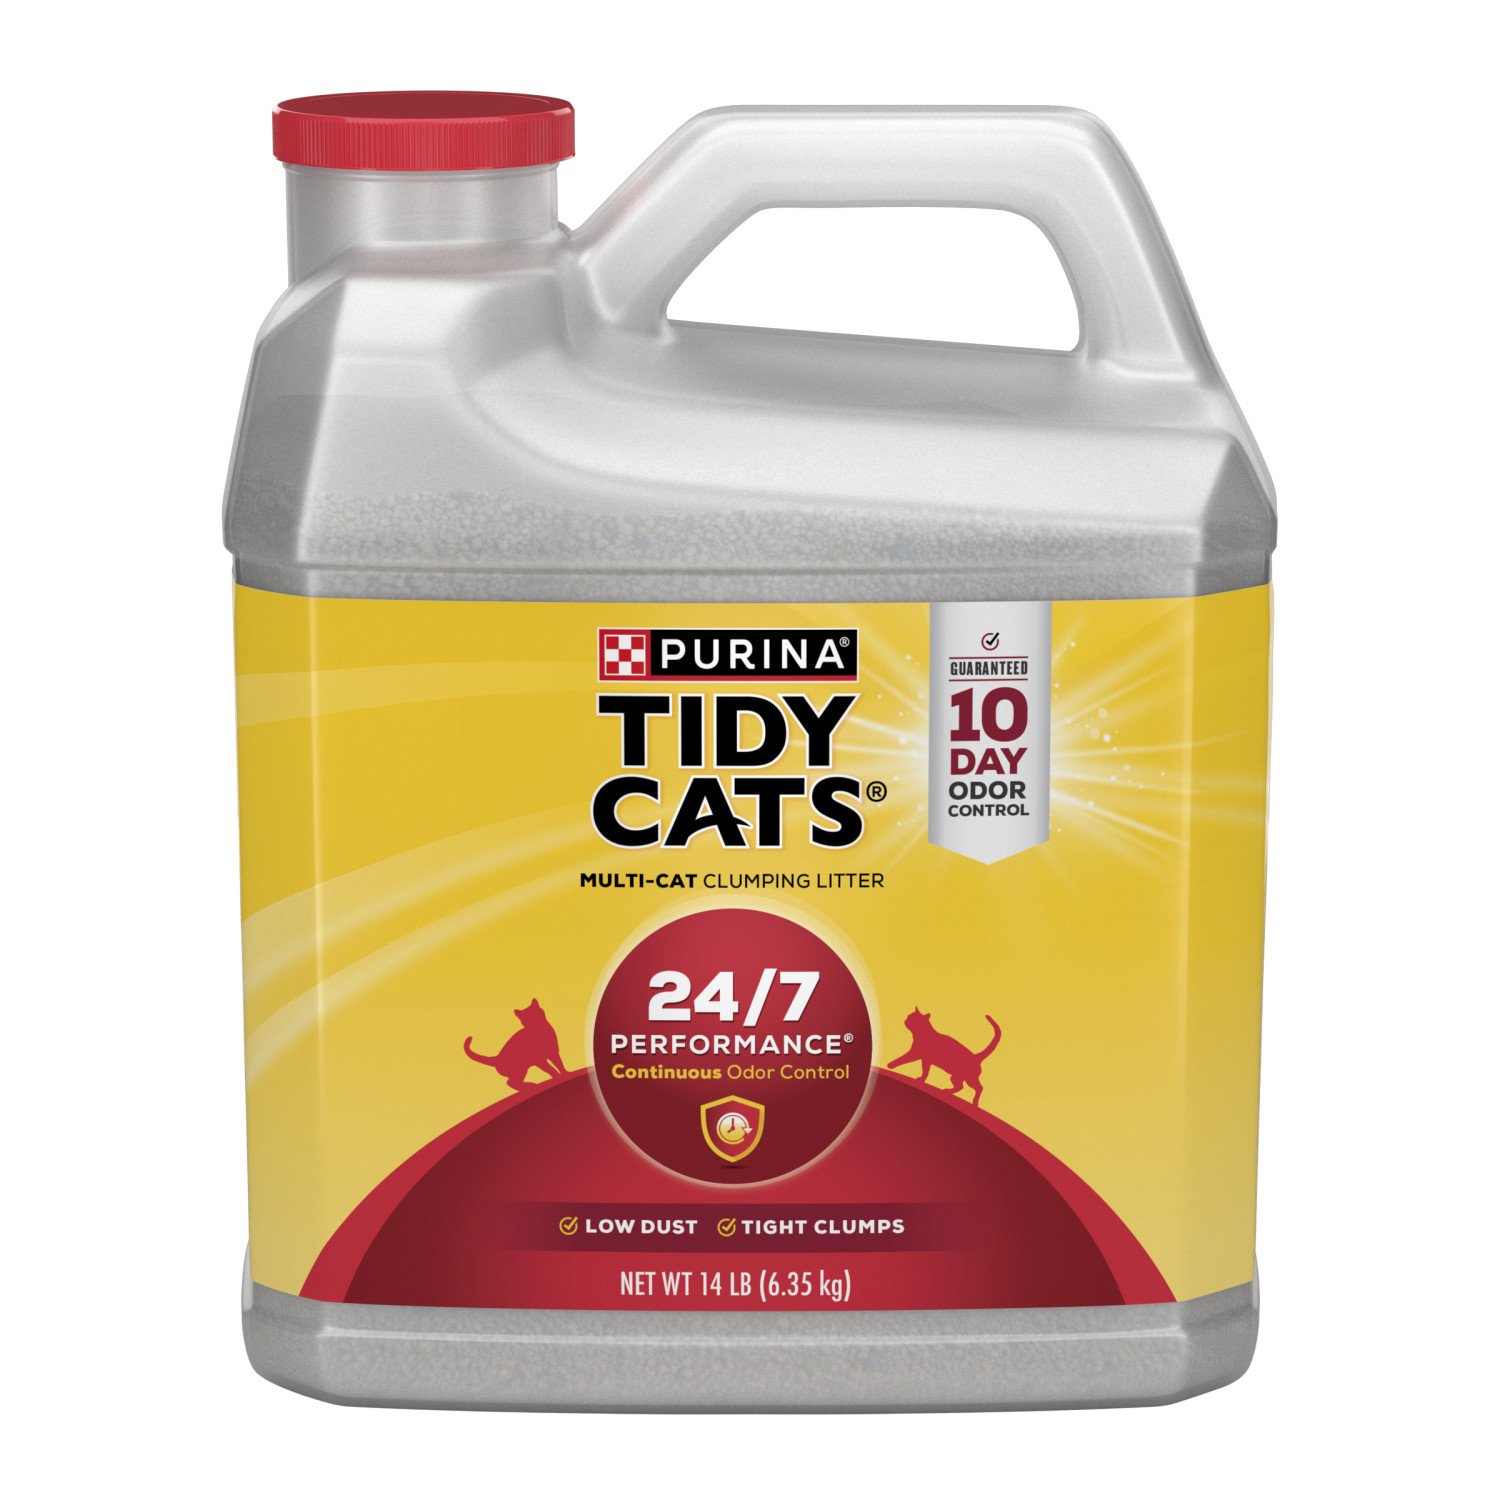 Purina Tidy Cats Clay, Clumping, Multi Cat Litter, Naturally Strong